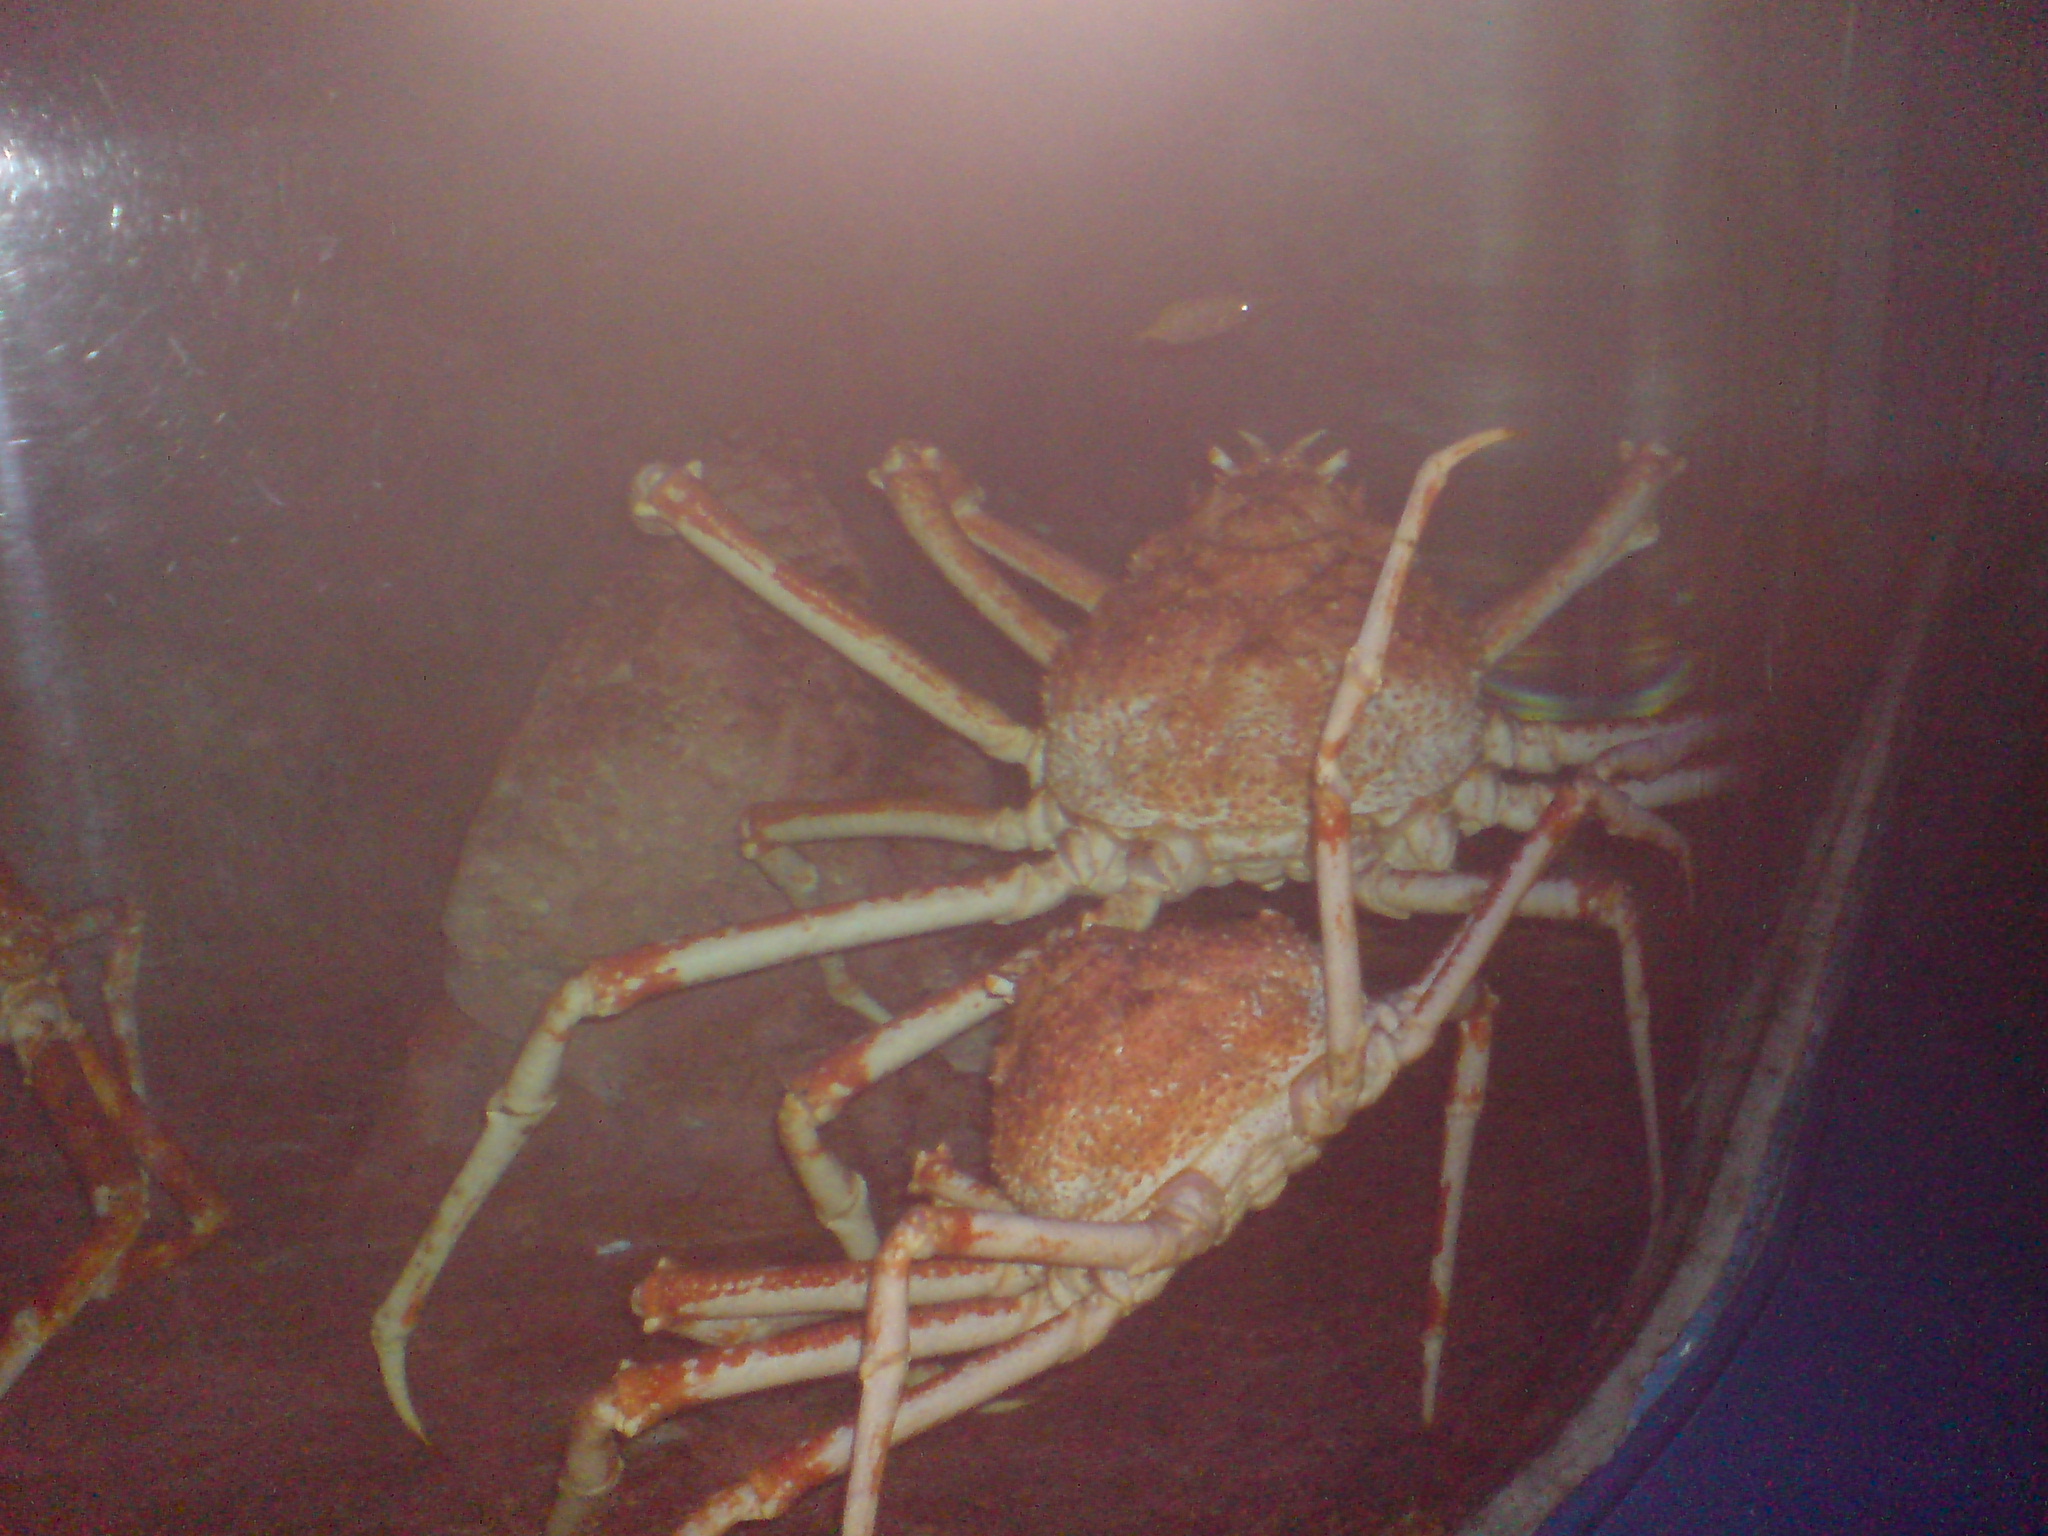 a large crab is sitting in a tank